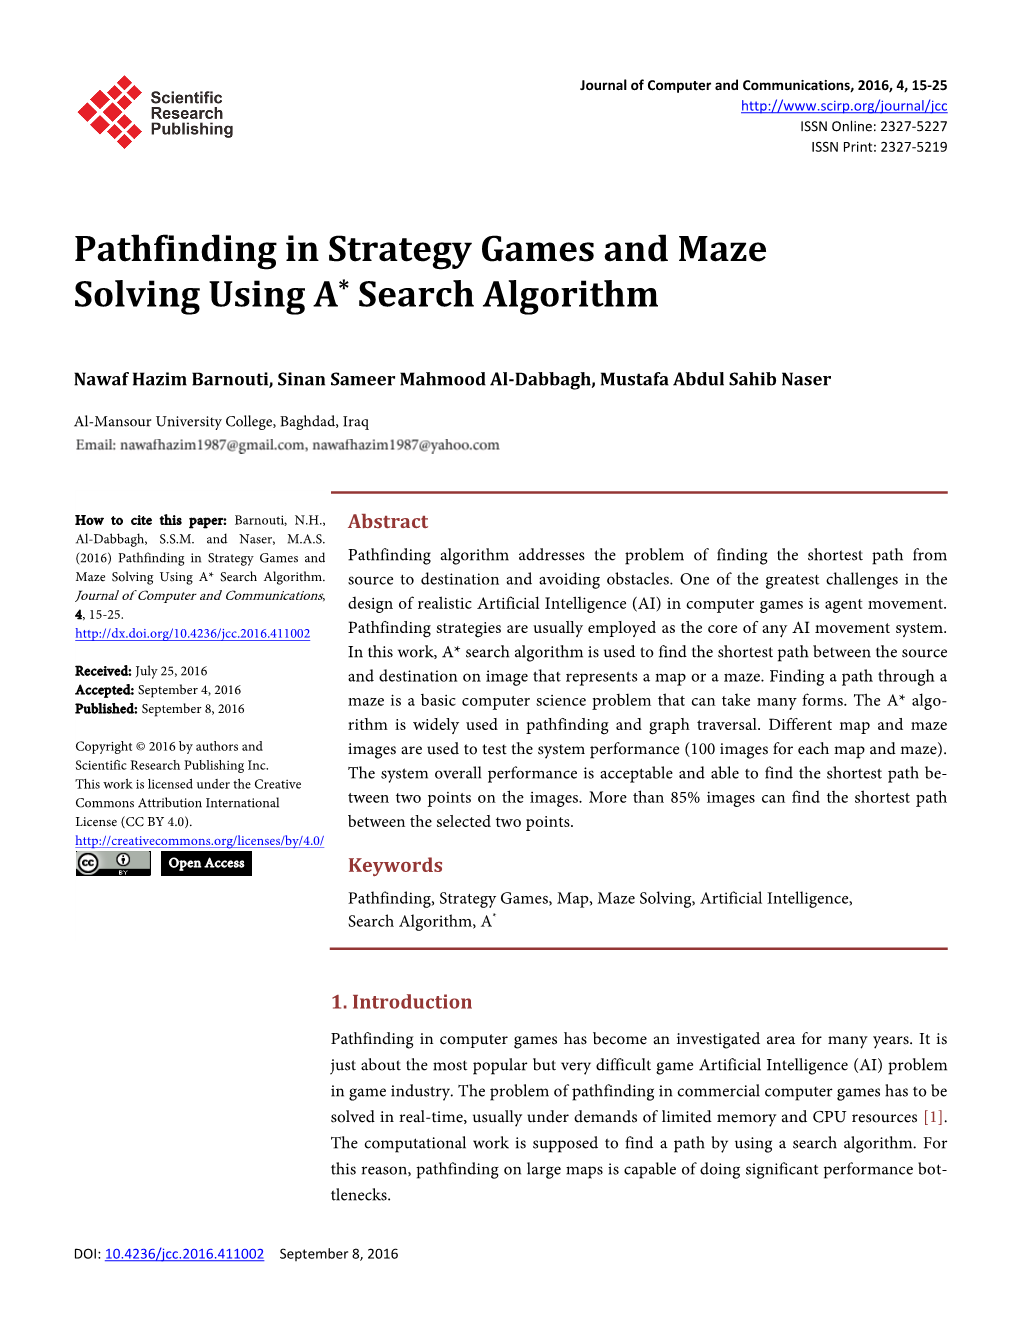 Pathfinding in Strategy Games and Maze Solving Using A* Search Algorithm